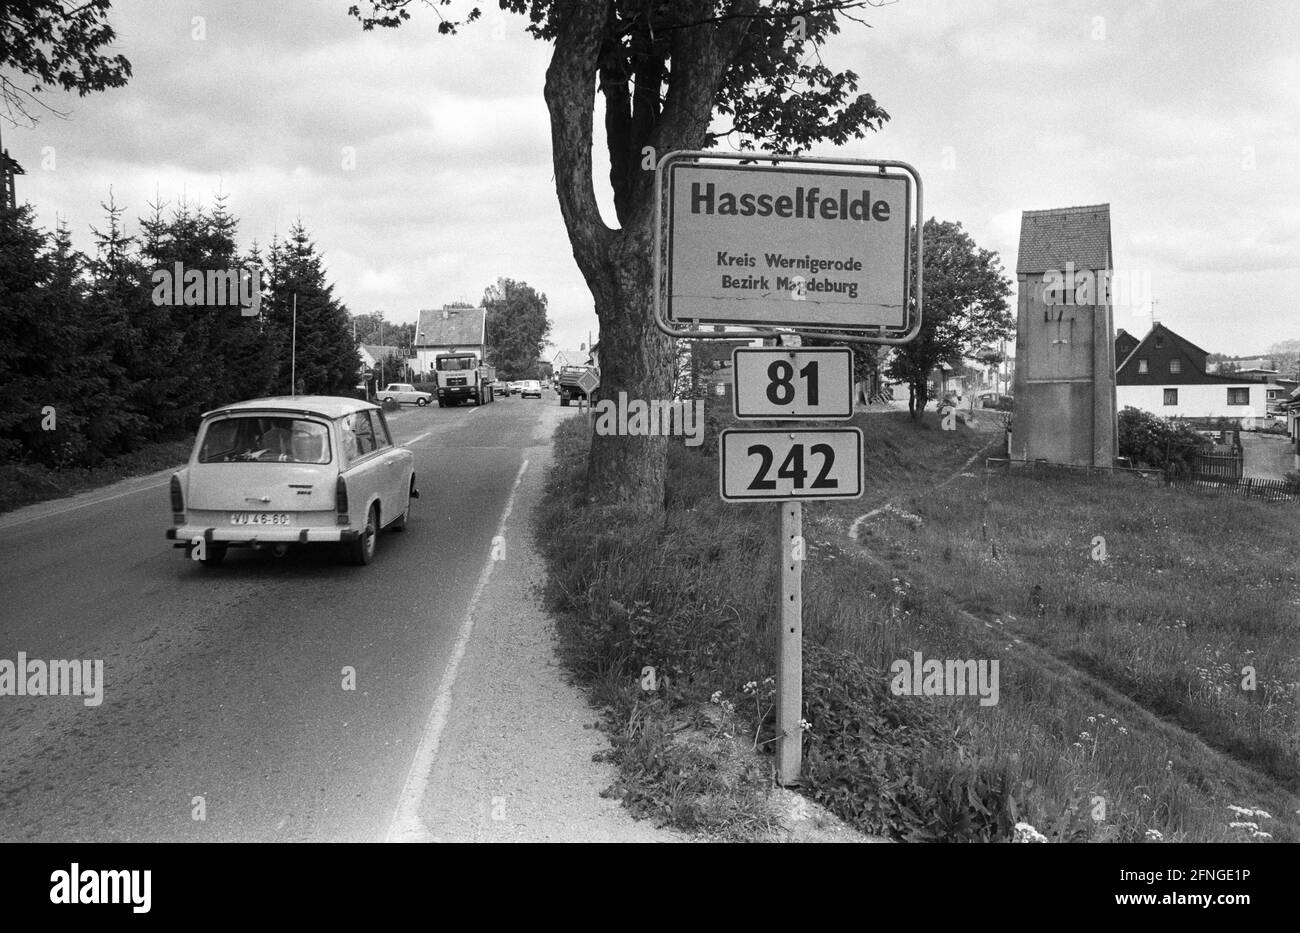 Germany, Hasselfelde, 25.05.1990 Archive-No.: 17-01-16 Place name sign Hasselfelde Photo: City Hasselfelde is a district of the city Oberharz am Brocken [automated translation] Stock Photo